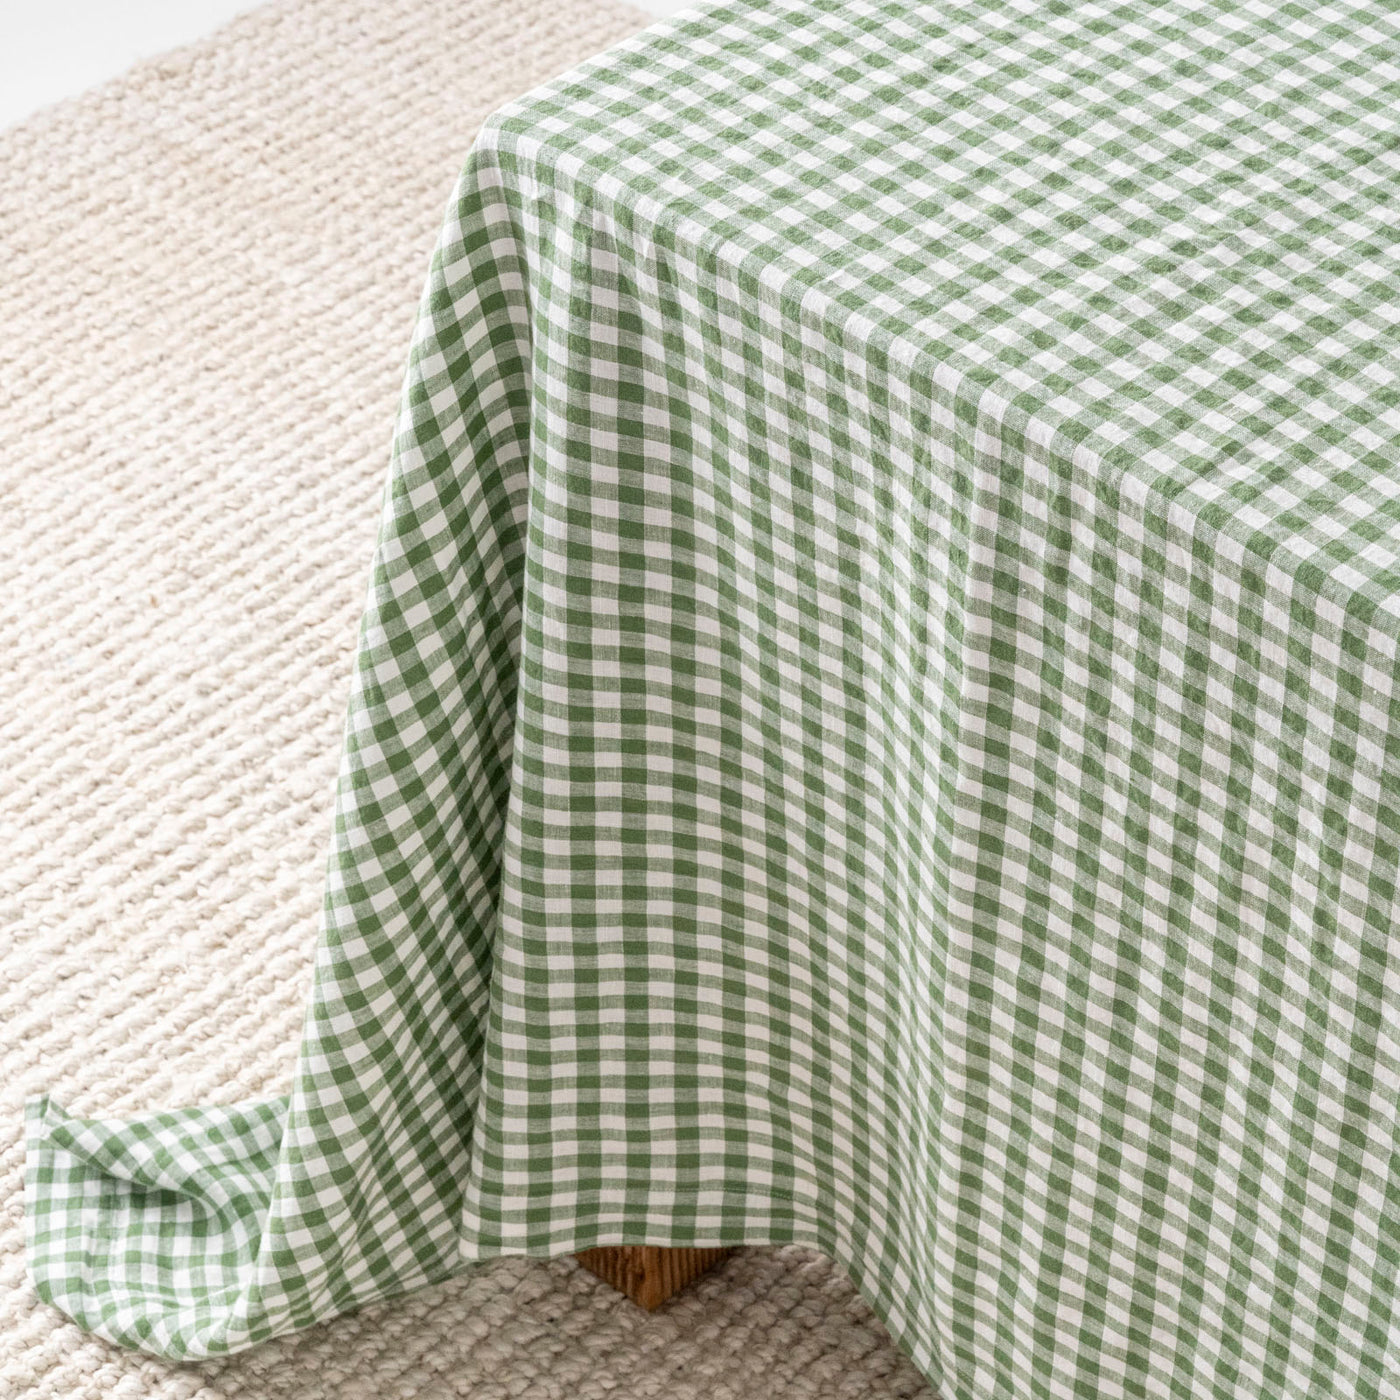 French Flax Linen Table Cloth in Ivy Gingham